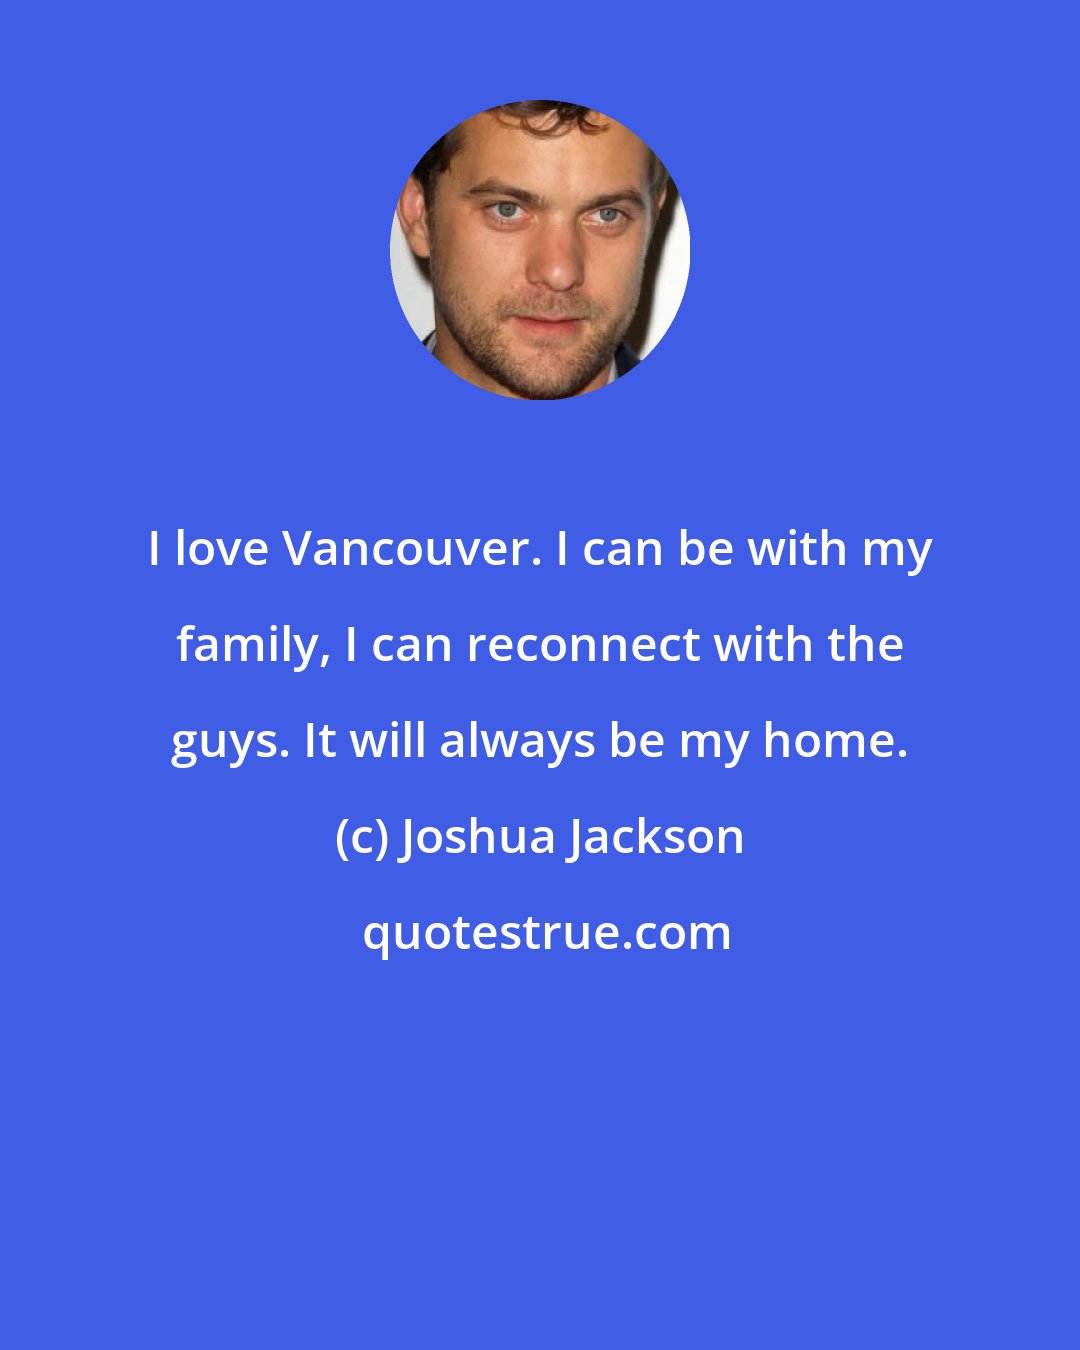 Joshua Jackson: I love Vancouver. I can be with my family, I can reconnect with the guys. It will always be my home.